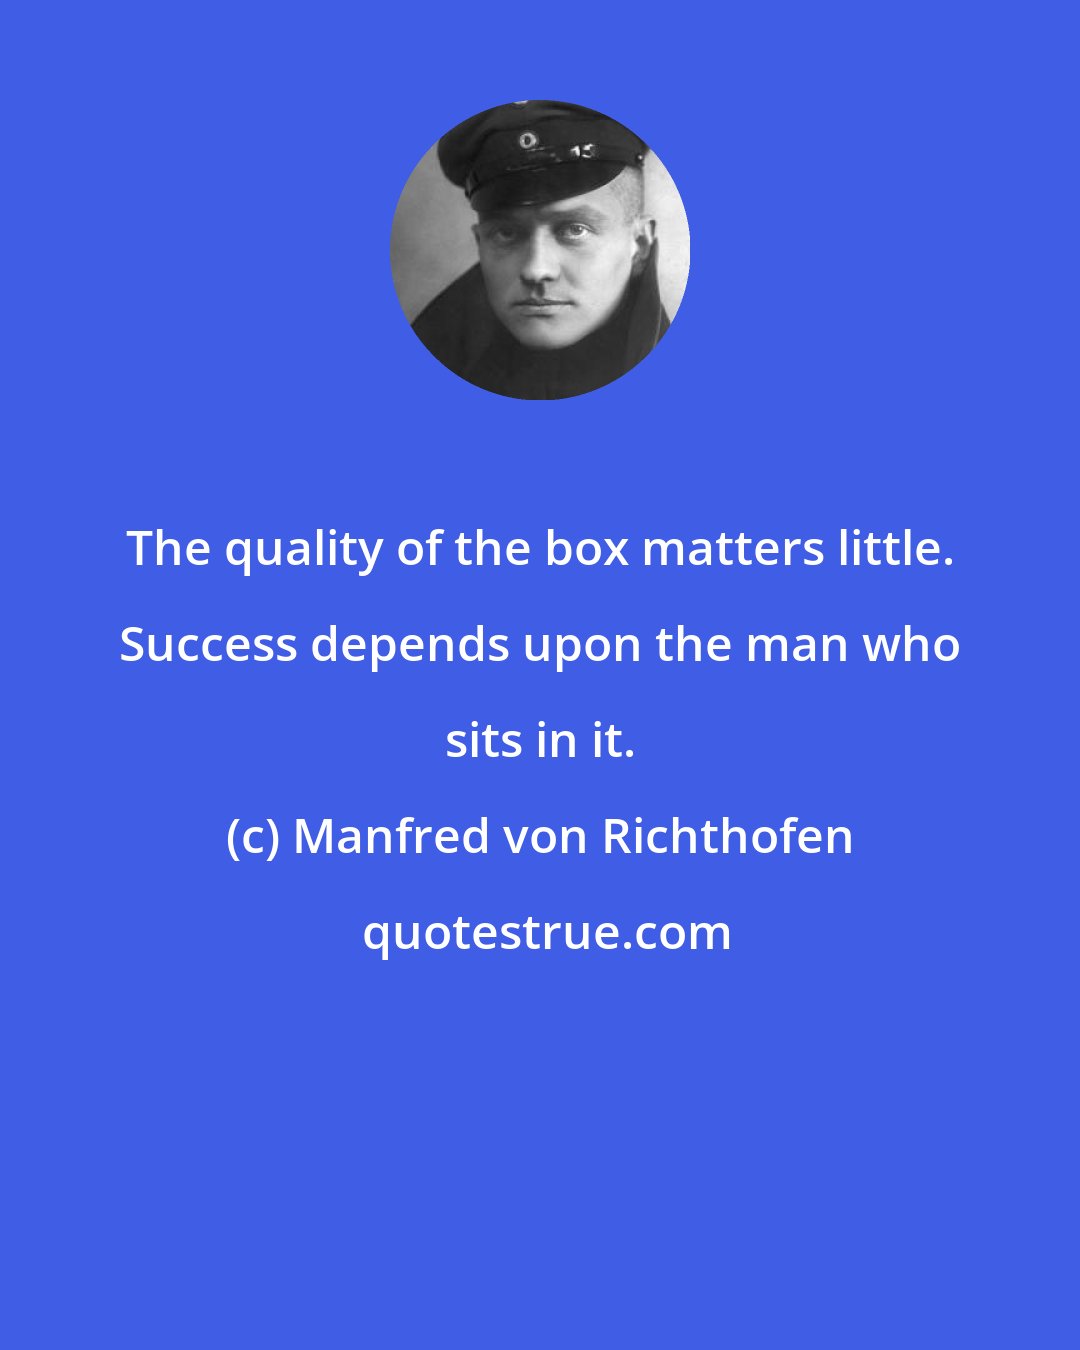 Manfred von Richthofen: The quality of the box matters little. Success depends upon the man who sits in it.